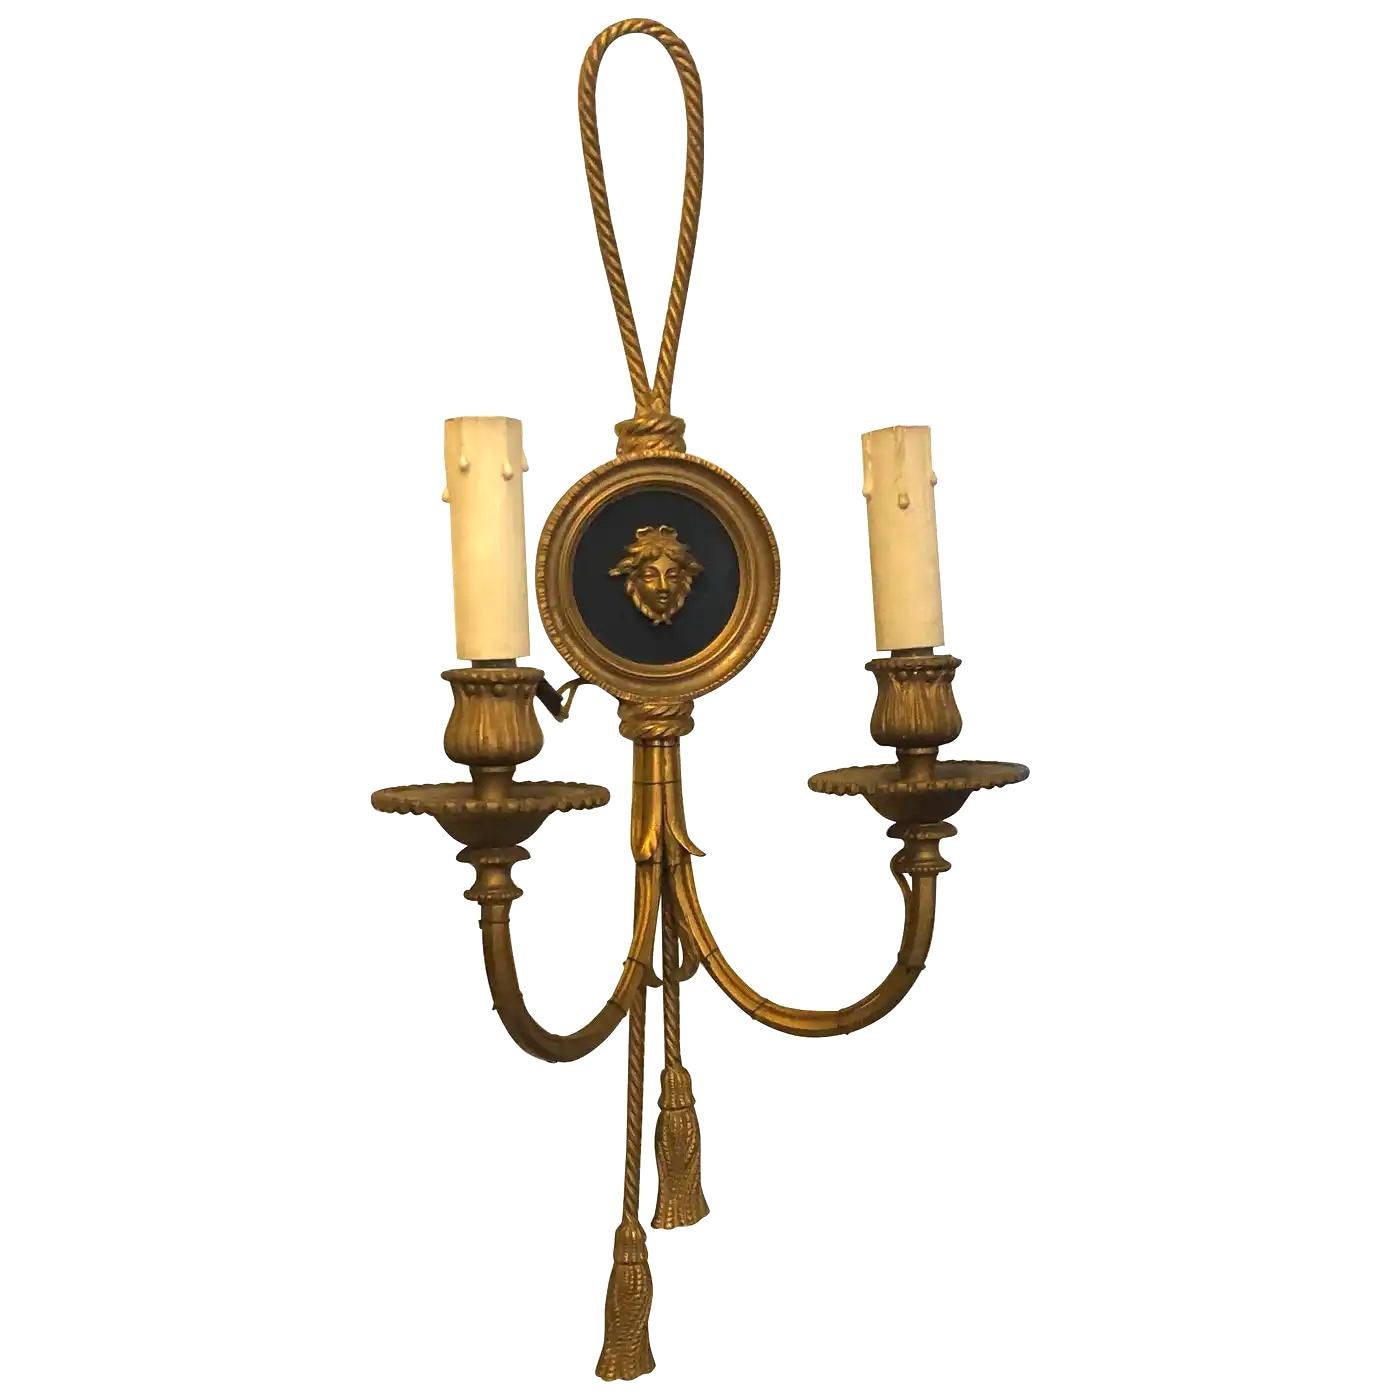 Two Italian wall sconces made in early 20th century, gilded bronze is in perfect conditions, they need regular e14 bulbs and work 110-240 volts, electric wire is external. They are decorated with a Medusa. The Gilded Bronze Wall Sconces are